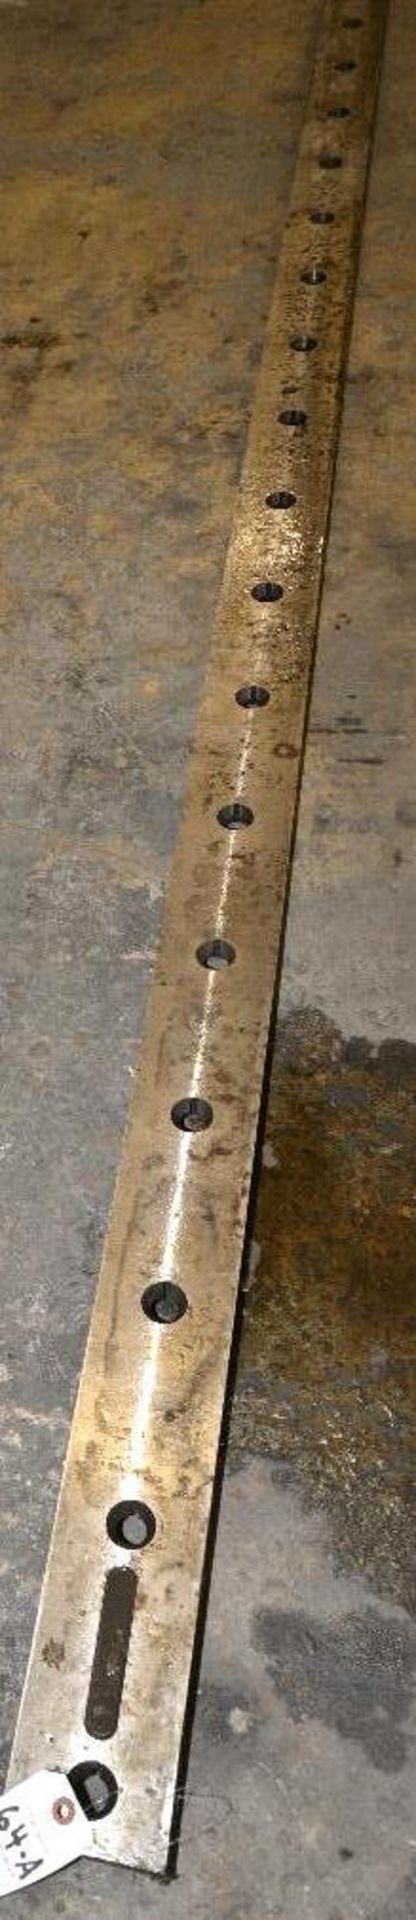 SHEAR BLADE (USED) 10 FT. - Image 2 of 4